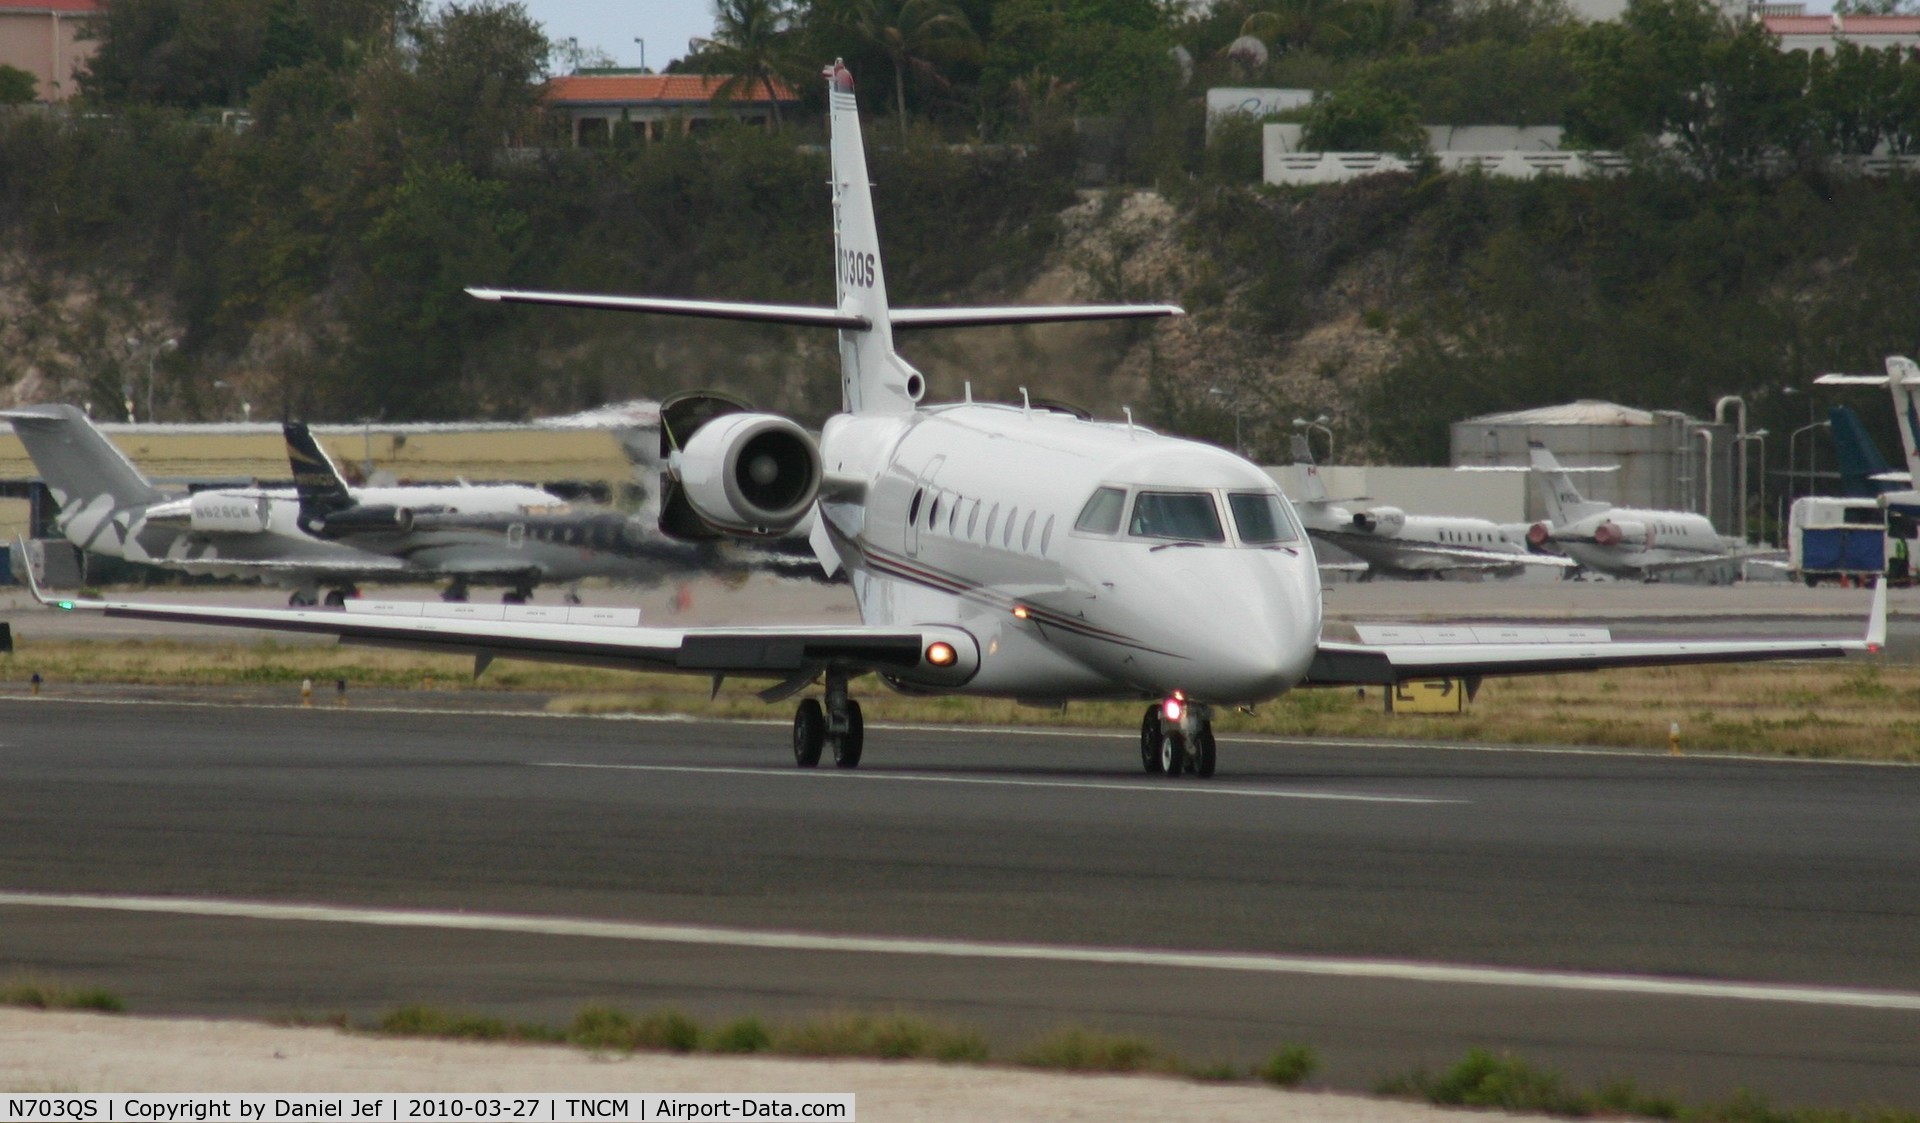 N703QS, 2002 Israel Aircraft Industries Gulfstream 200 C/N 060, N703QS makinb use of ther stopping power at TNCM